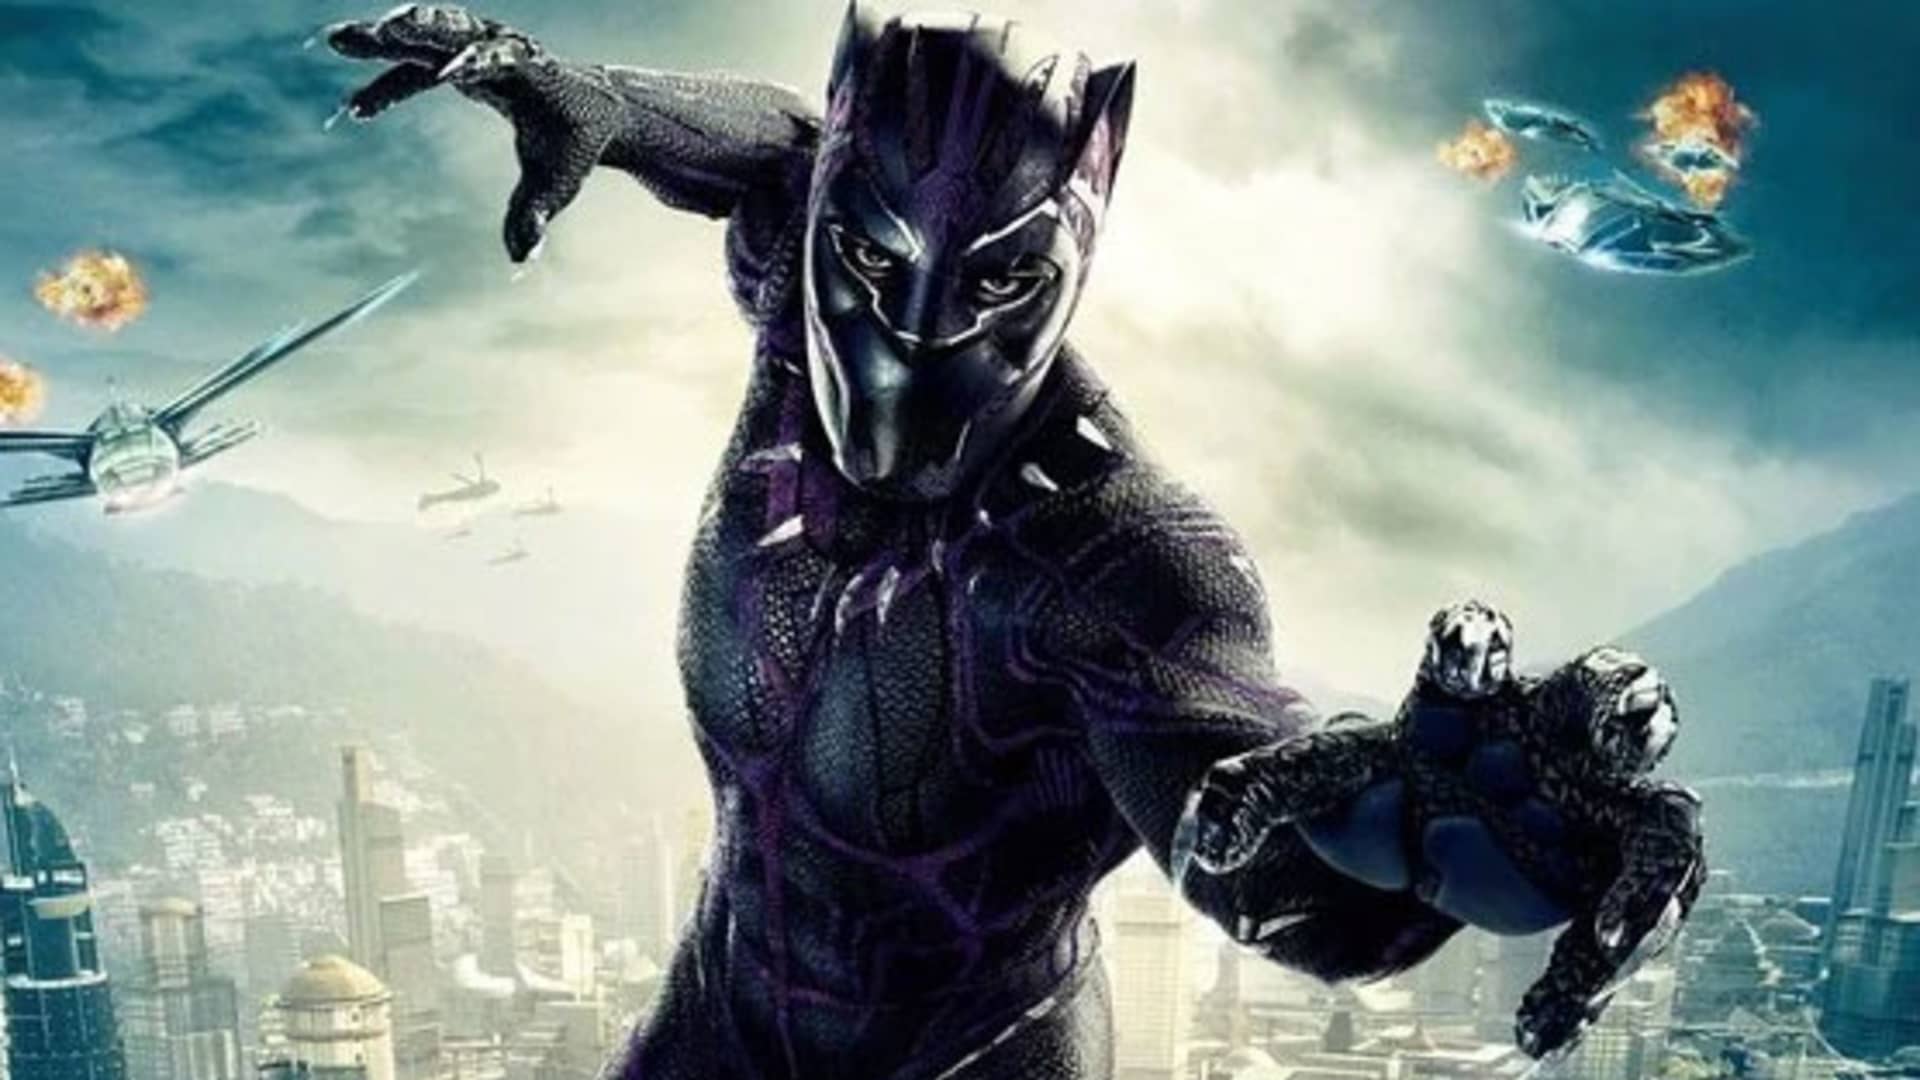 Black Panther' to give big boost to Disney's bottom line: JP Morgan